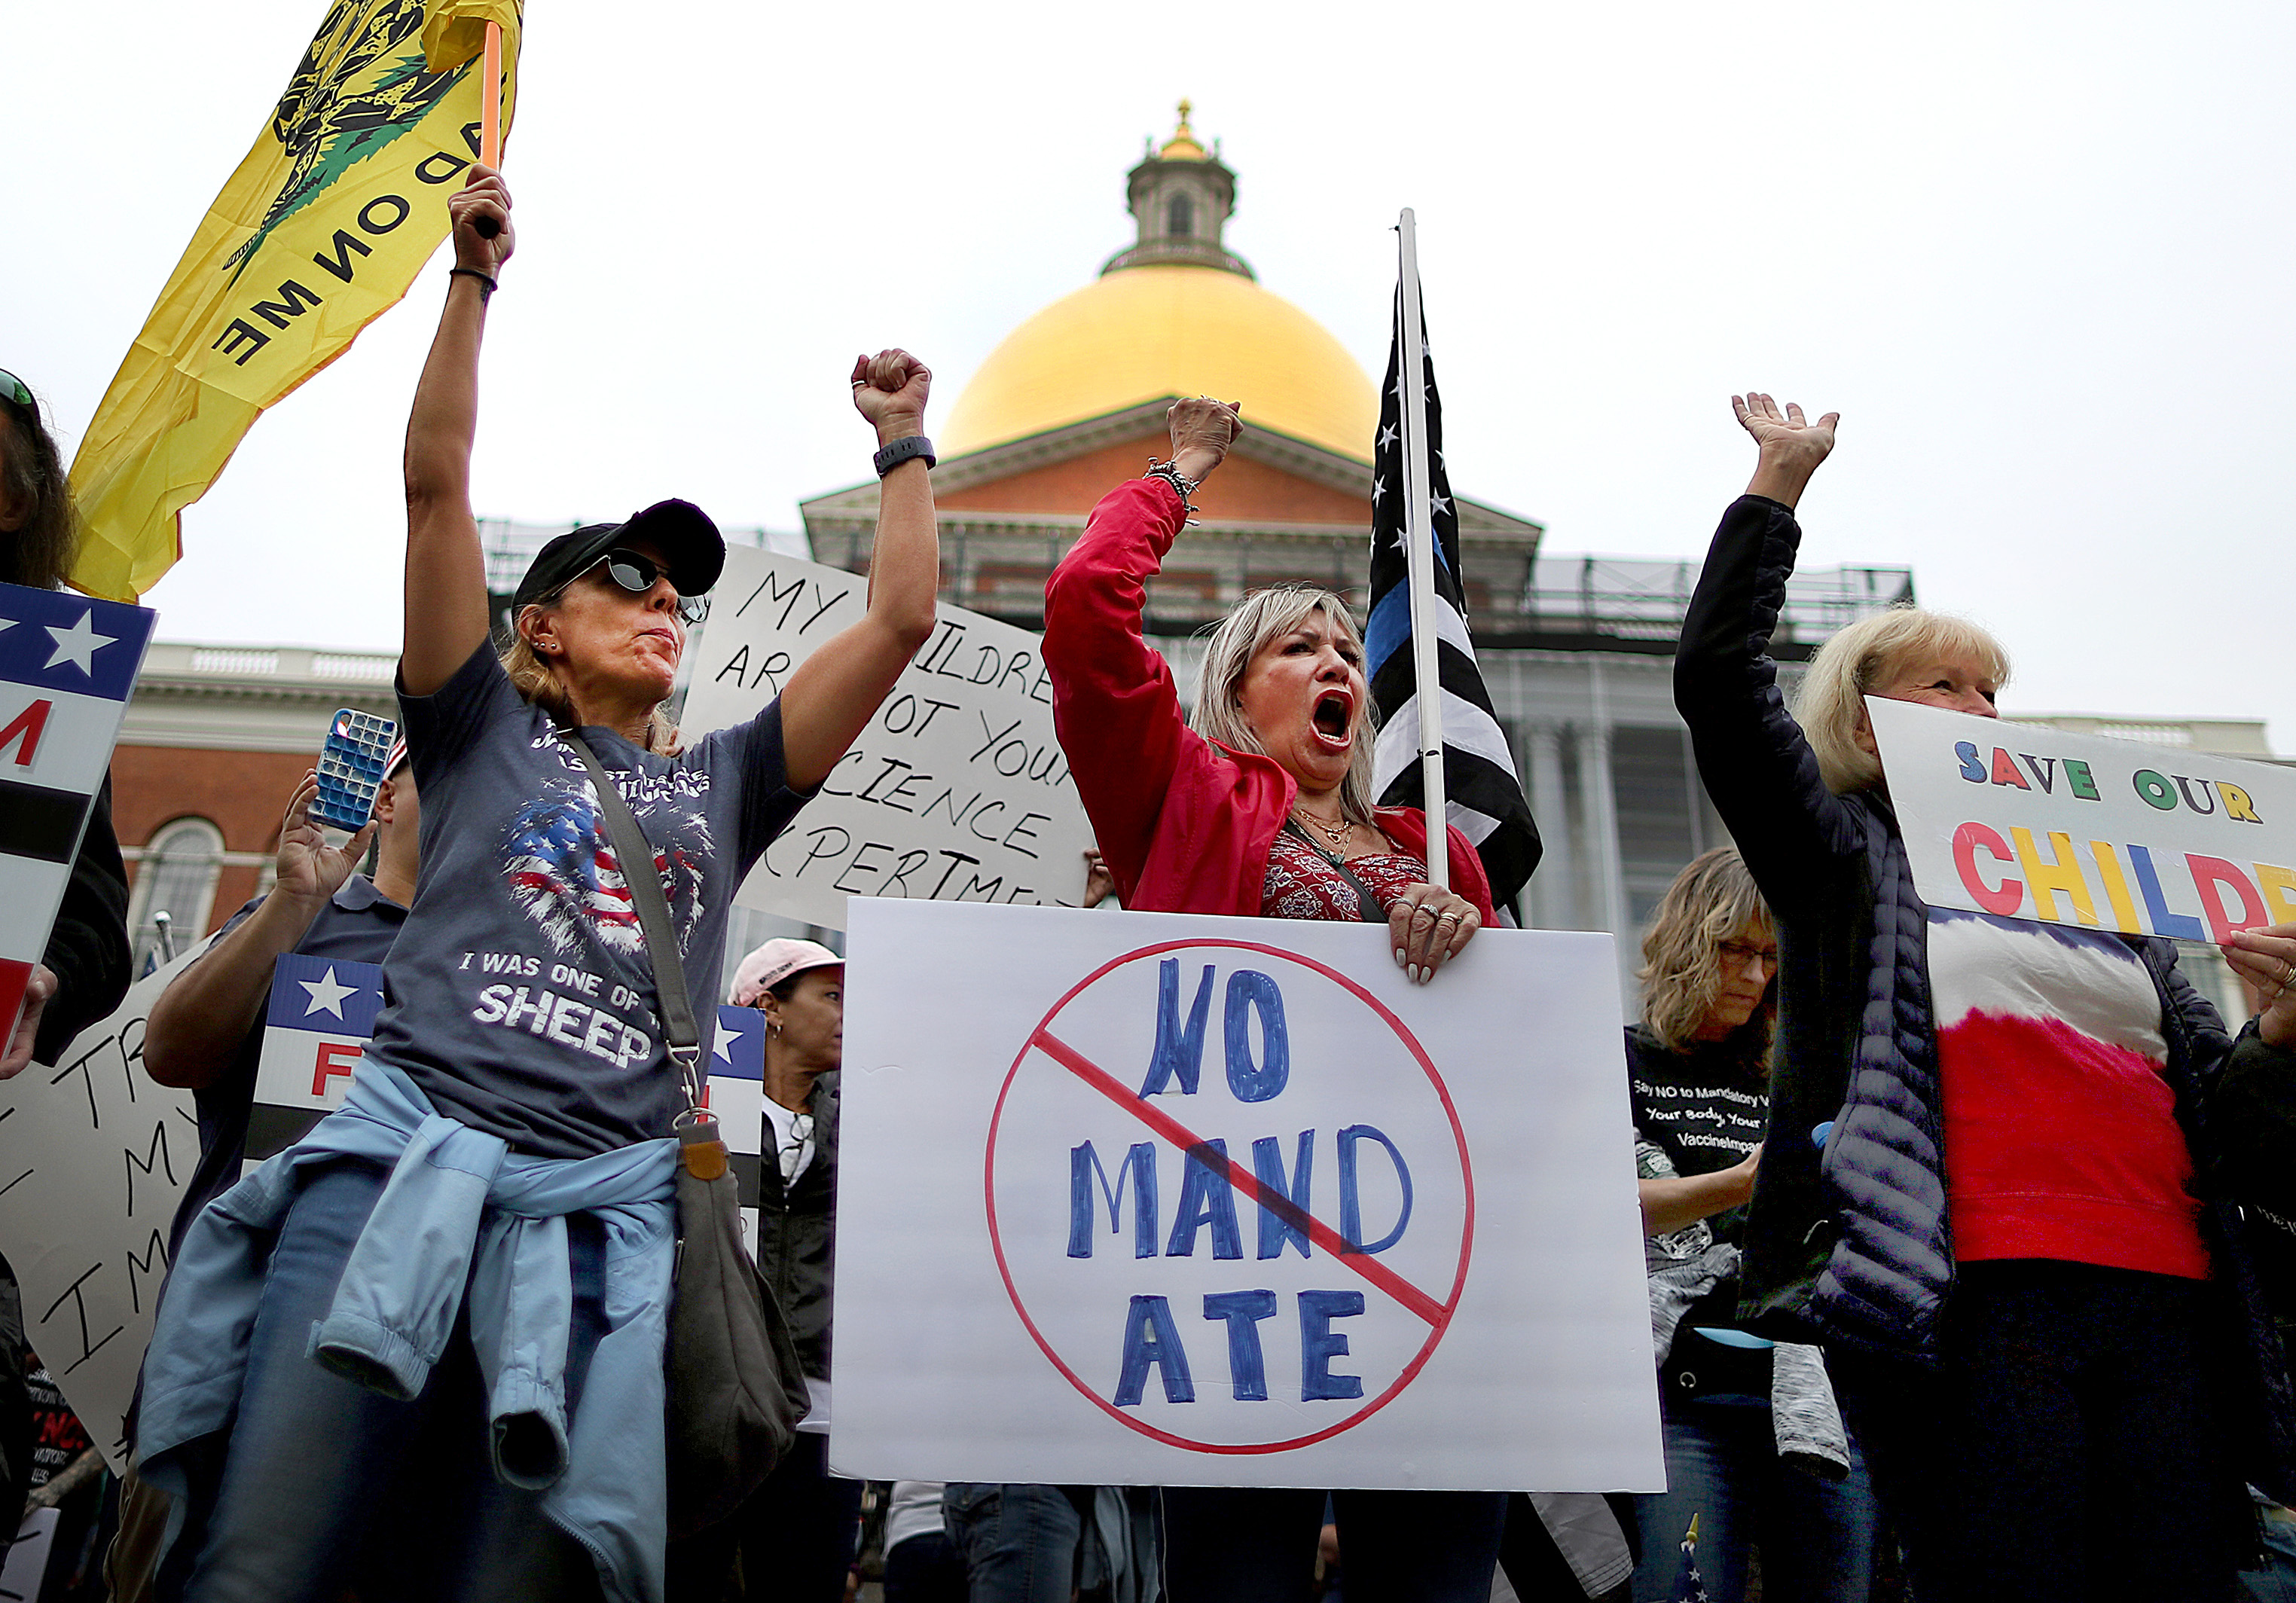 A Freedom Rally was held on Beacon Street in front of the State House in Boston, with hundreds protesting against mandatory COVID-19 vaccines on September 17, 2021. (John Tlumacki—The Boston Globe/Getty Images)